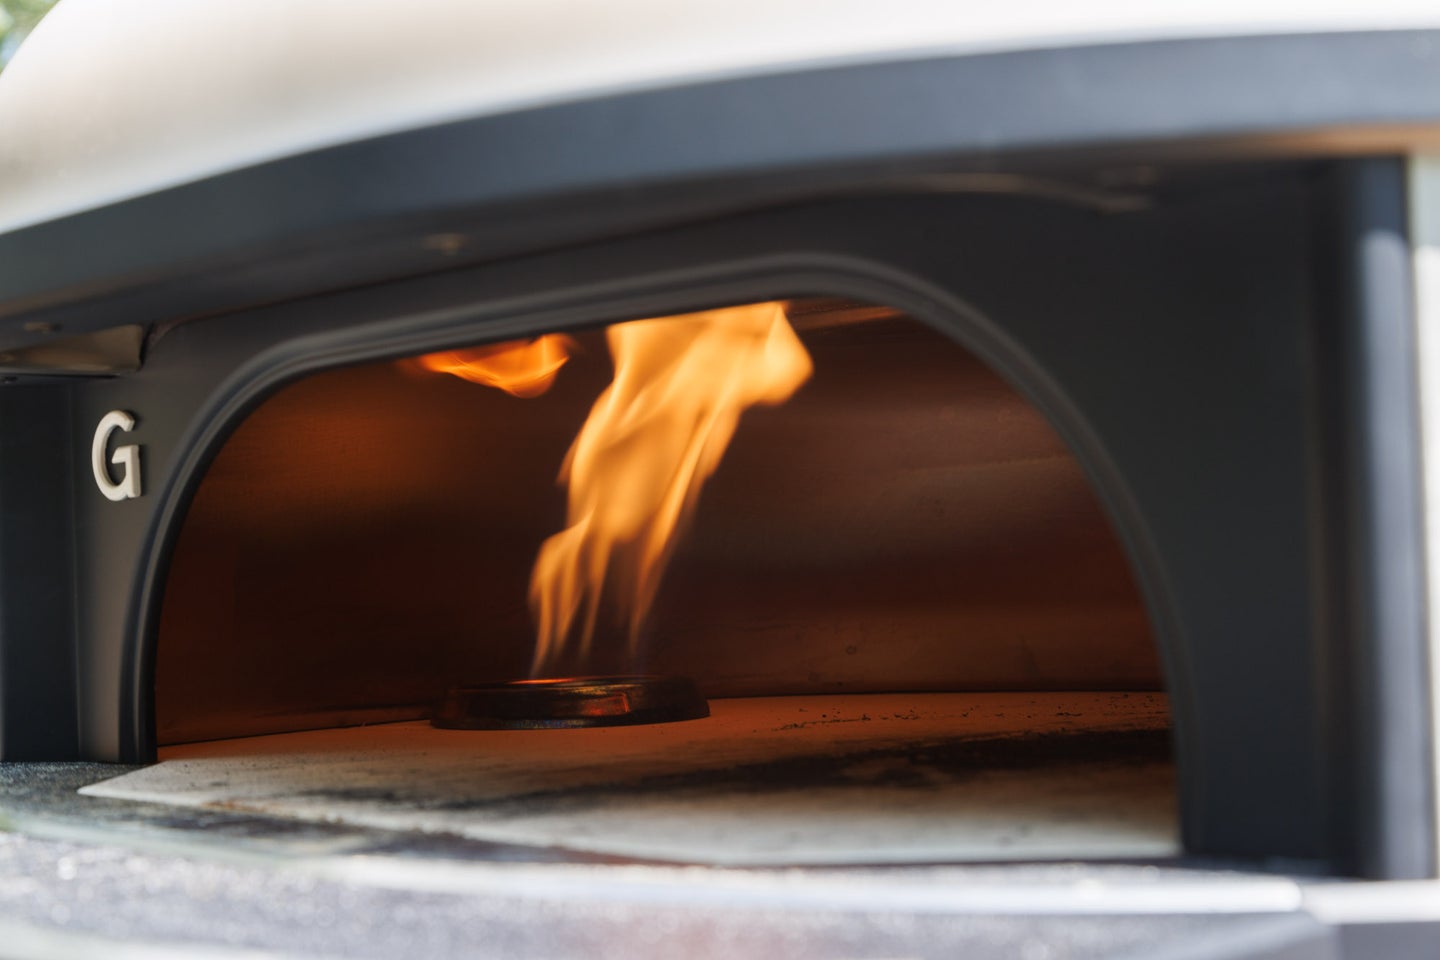 A closer look inside the Gozney Dome pizza oven